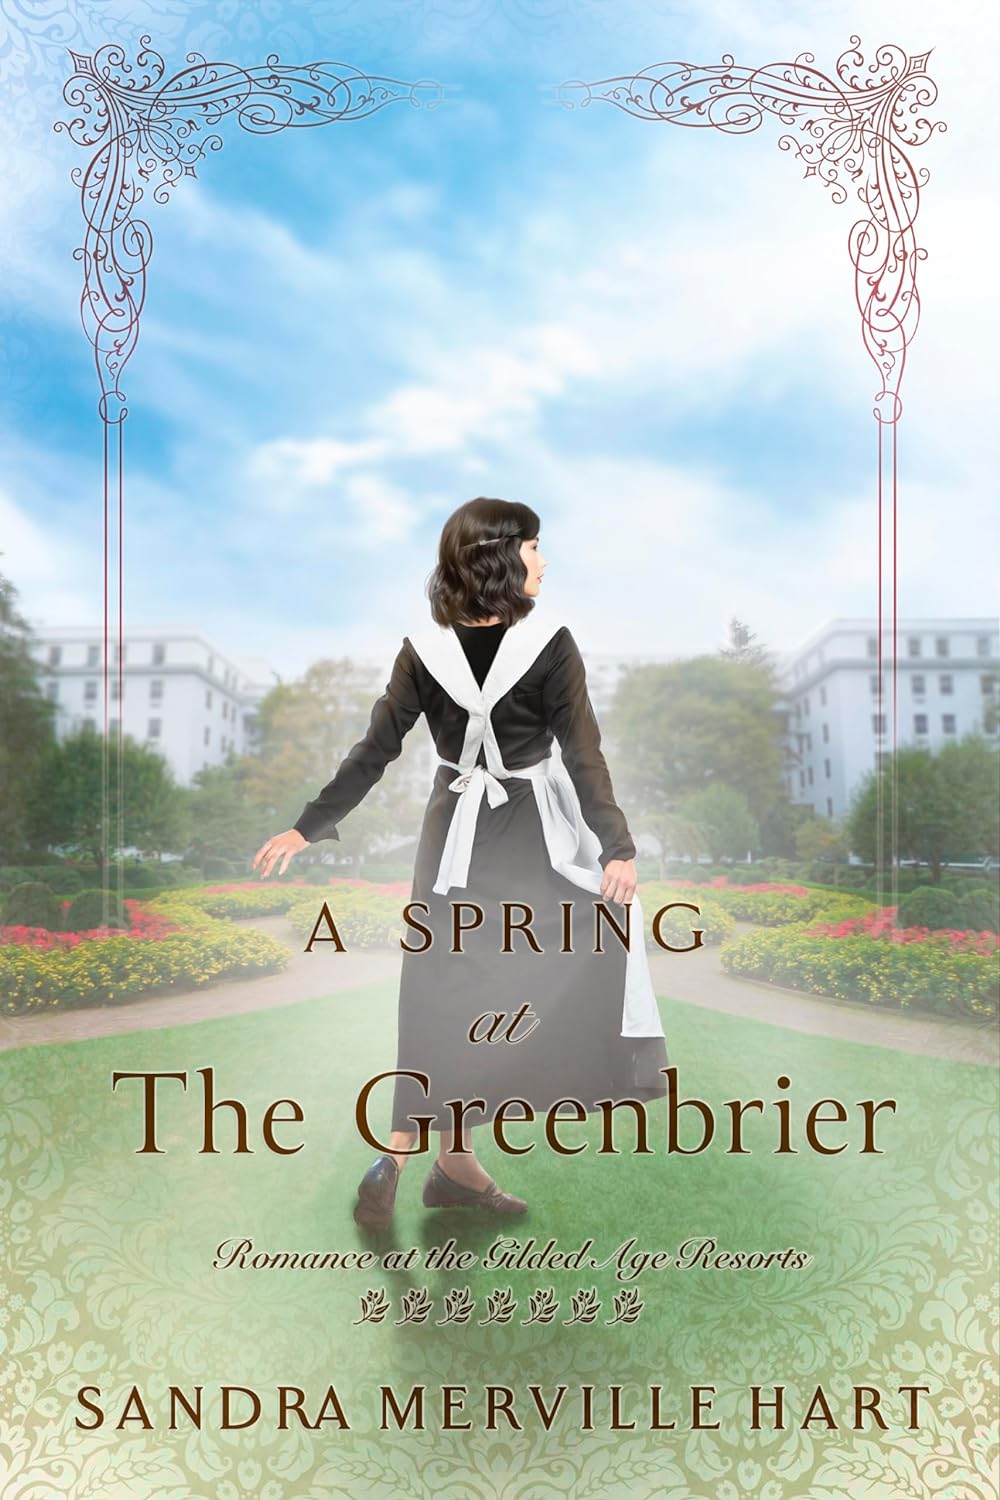 A Spring at The Greenbrier